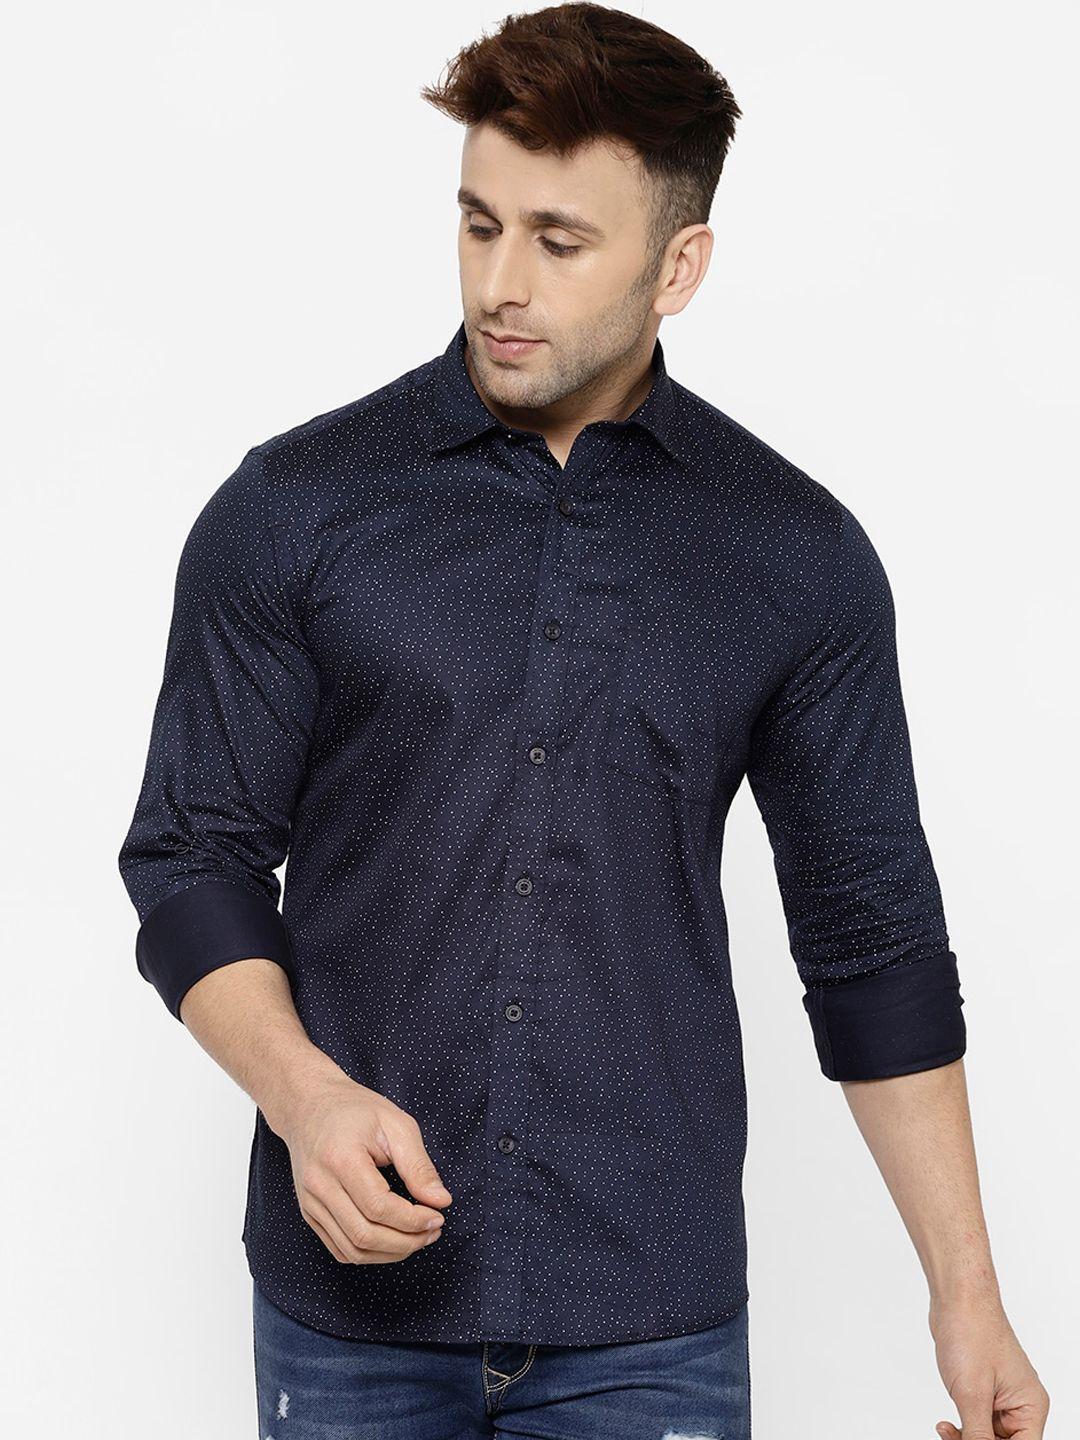 cape-canary-men-navy-blue-regular-fit-printed-cotton-casual-shirt